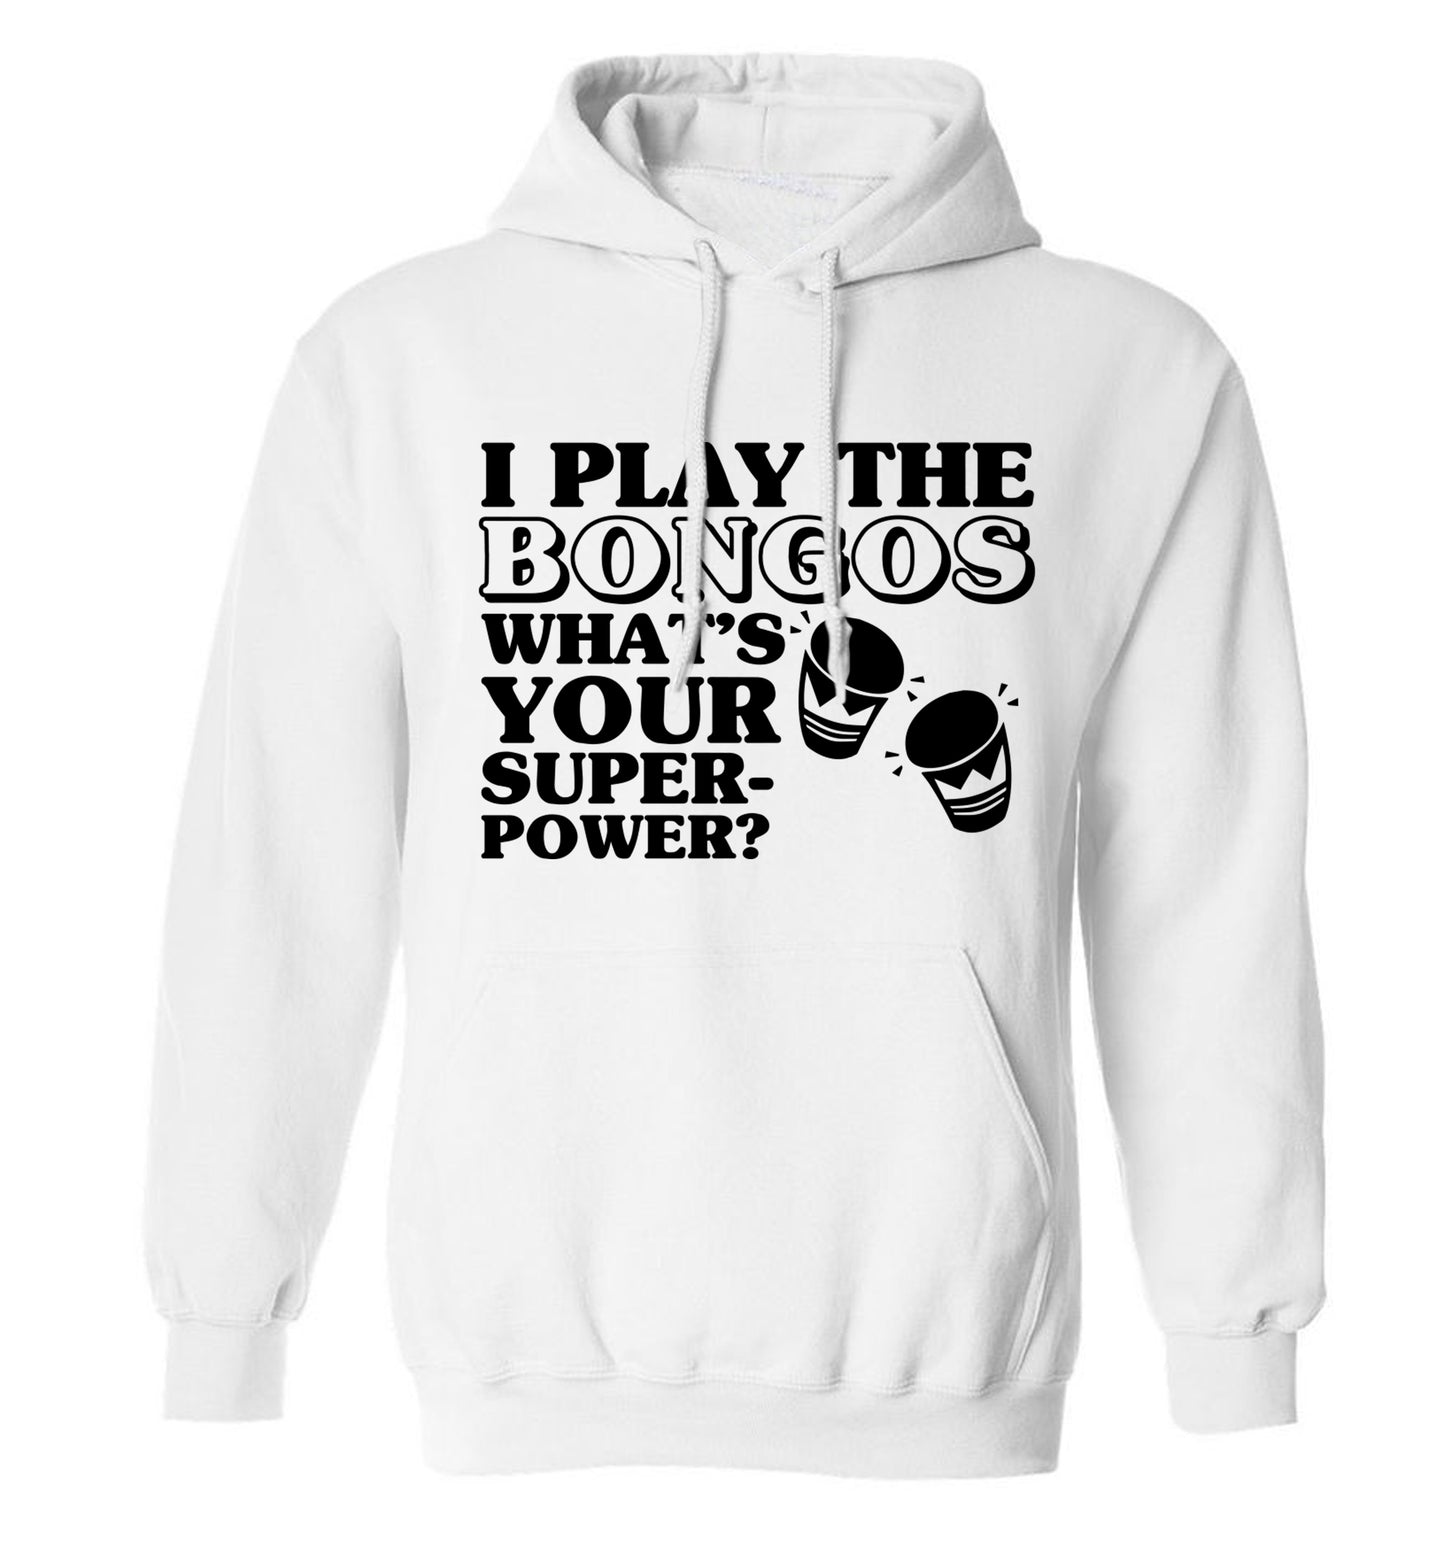 I play the bongos what's your superpower? adults unisexwhite hoodie 2XL